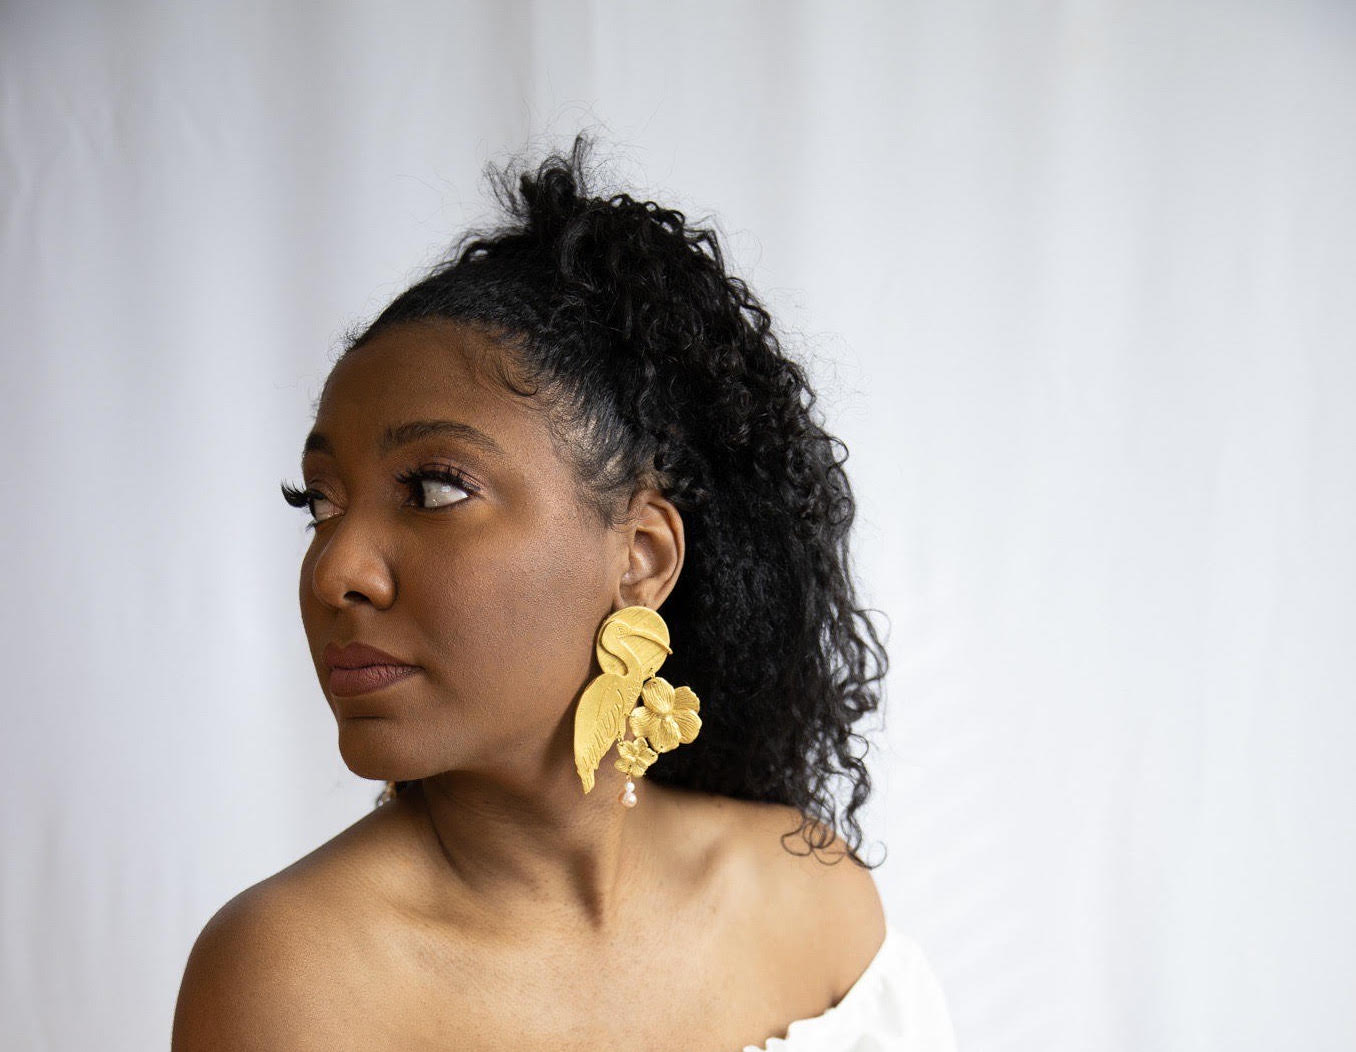 Meet The Jewelry Designer Creating 'Wearable Art' Inspired By Trinidad and Tobago